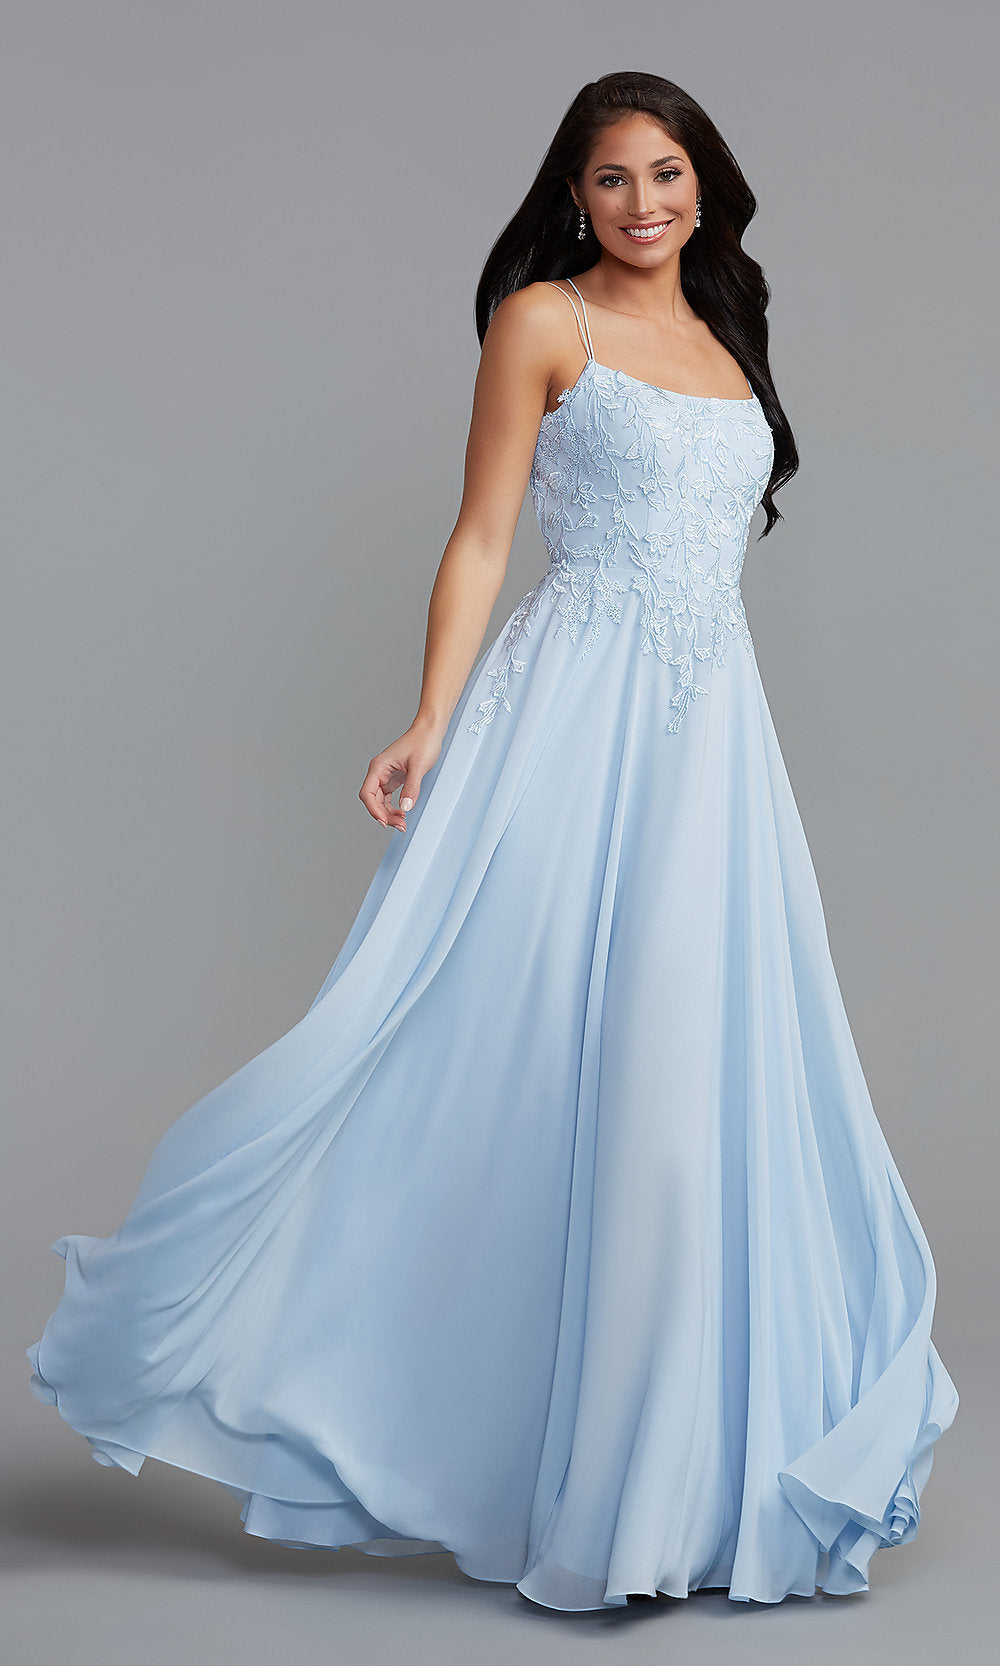  Strappy-Open-Back Long A-Line Prom Dress